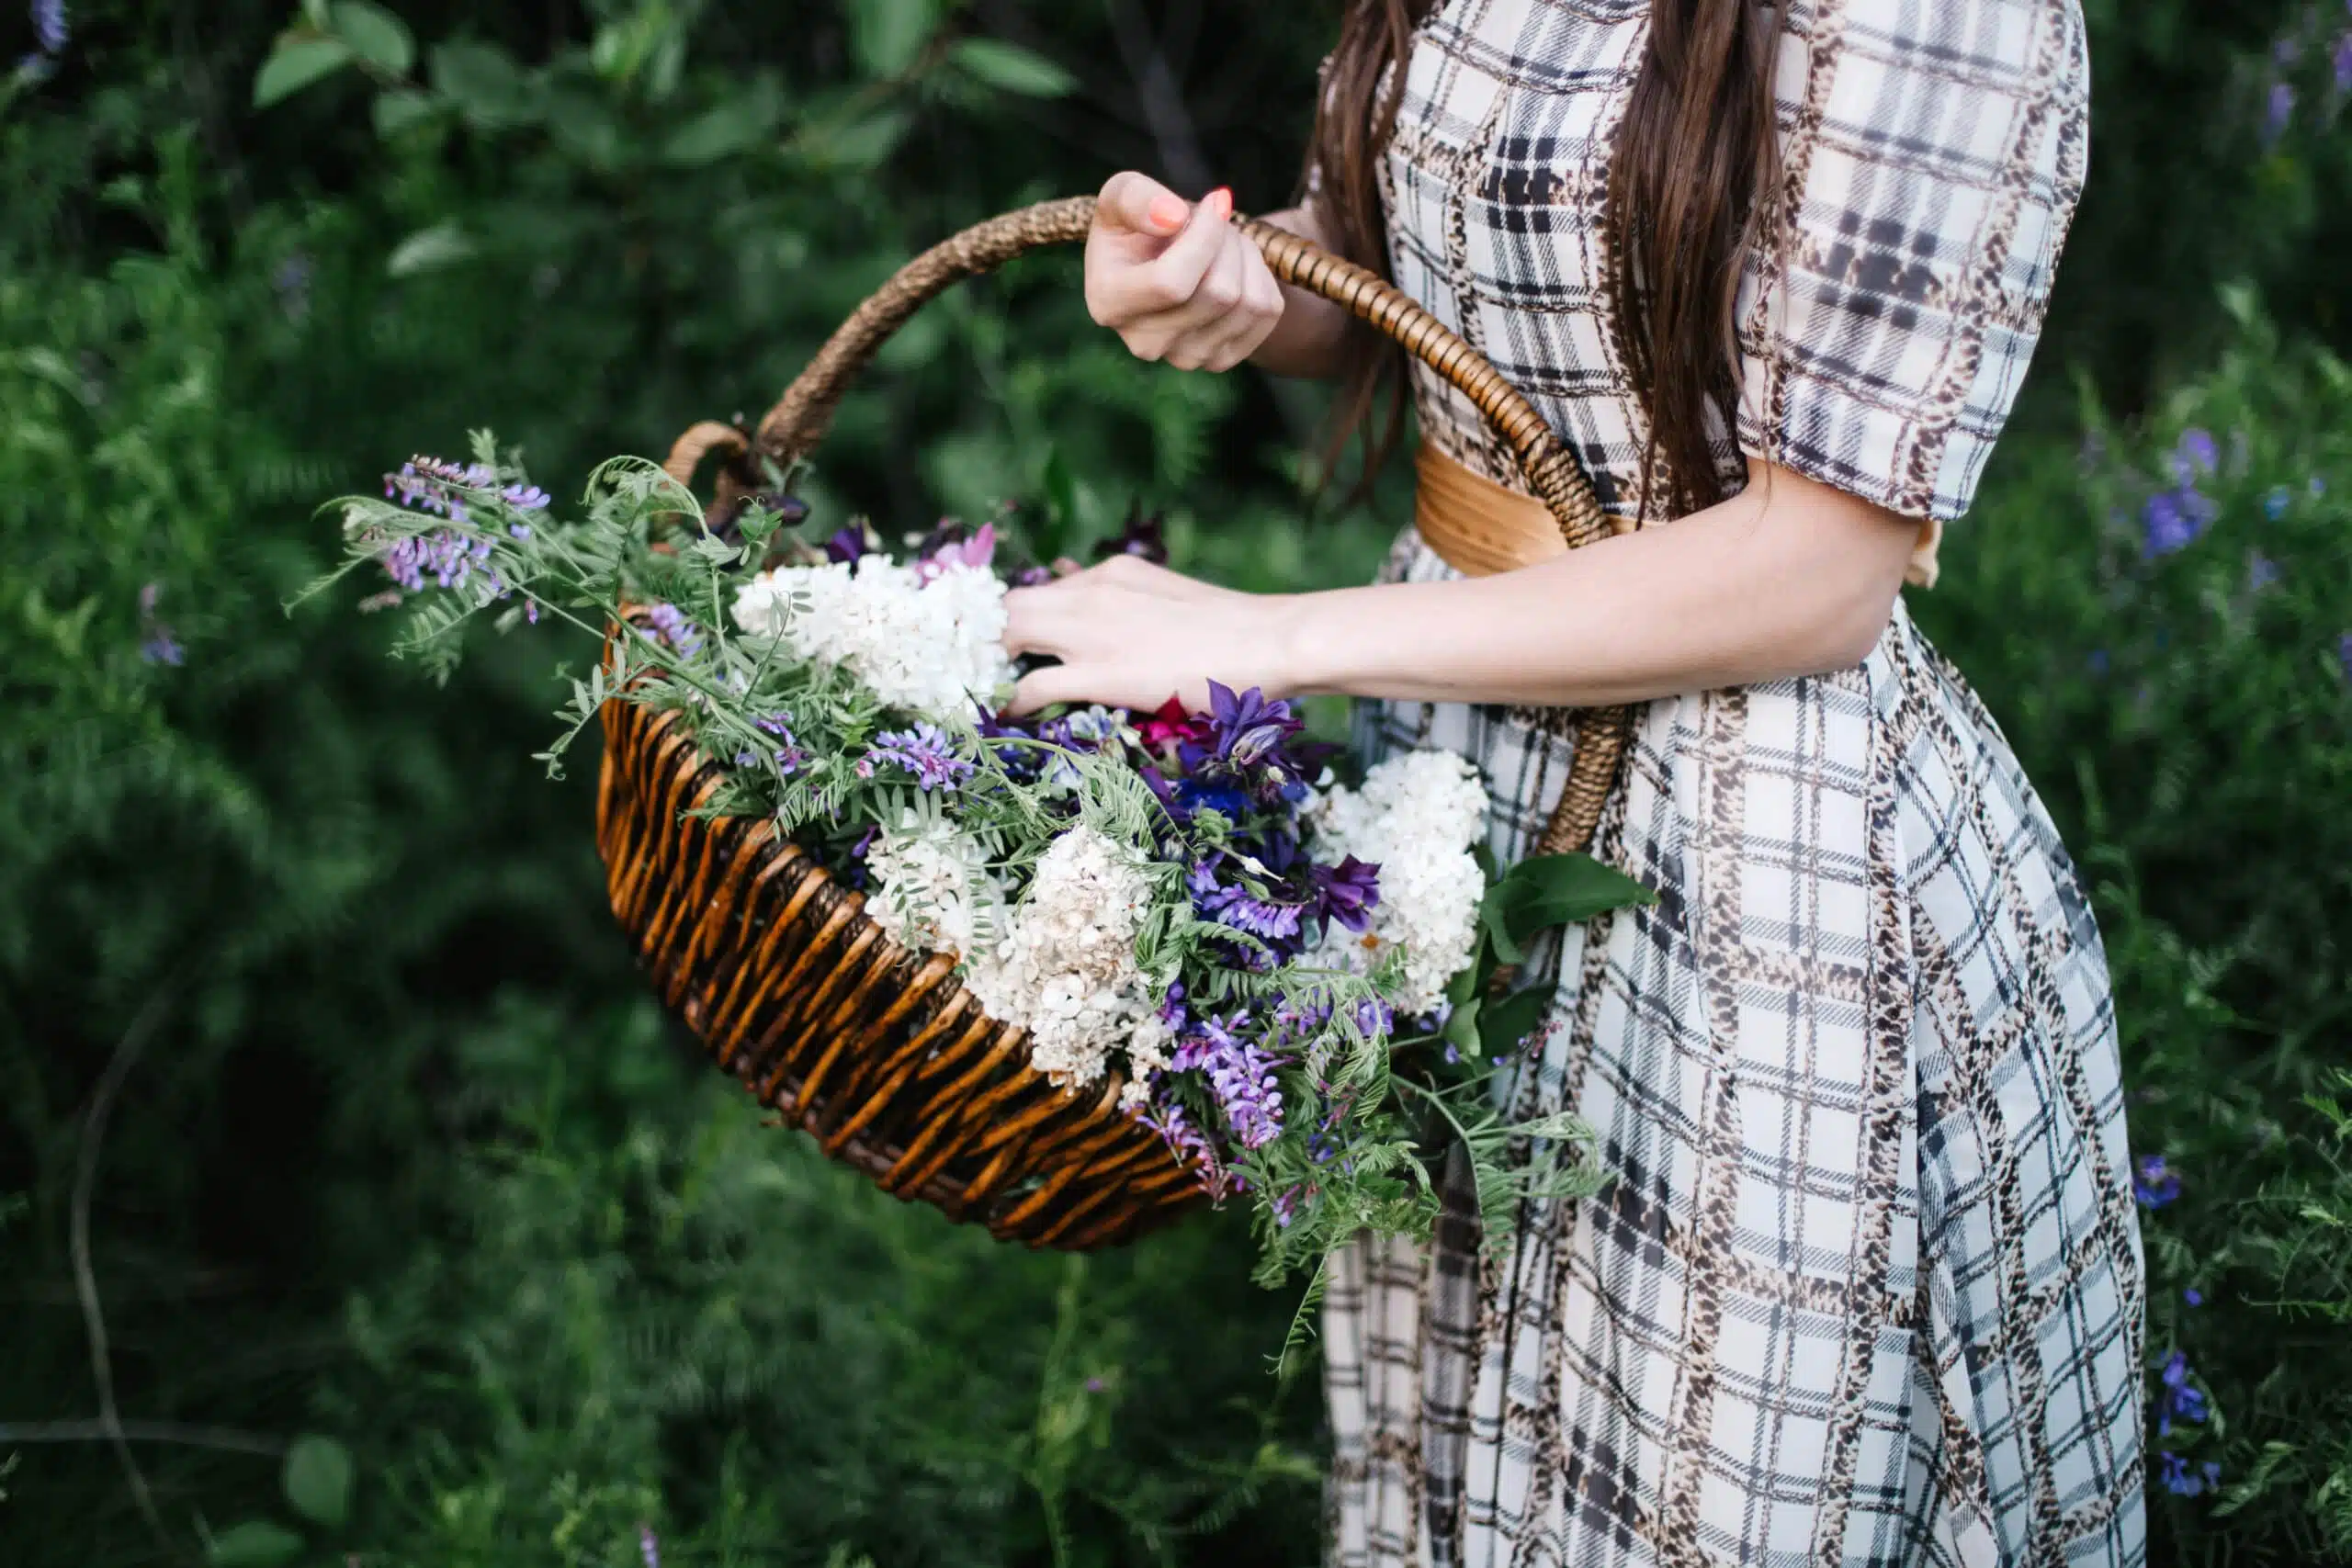 woman holding a basket of flowers